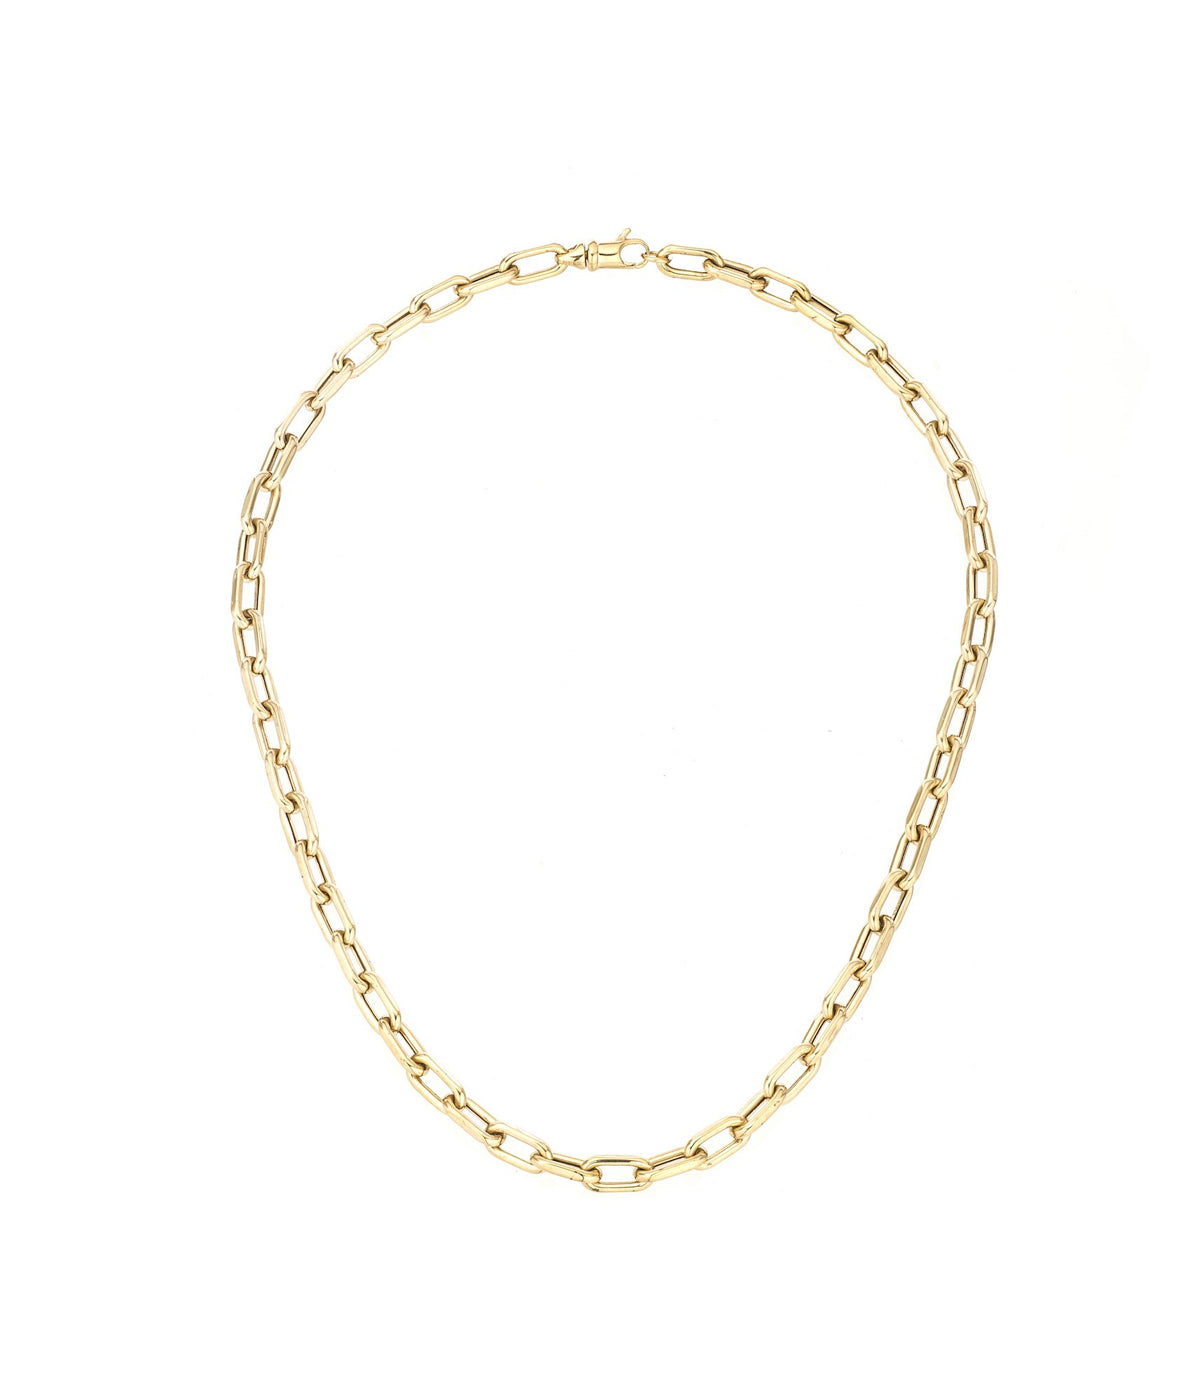 5.3mm 18inch Italian Chain Link Necklace in 14K Yellow Gold